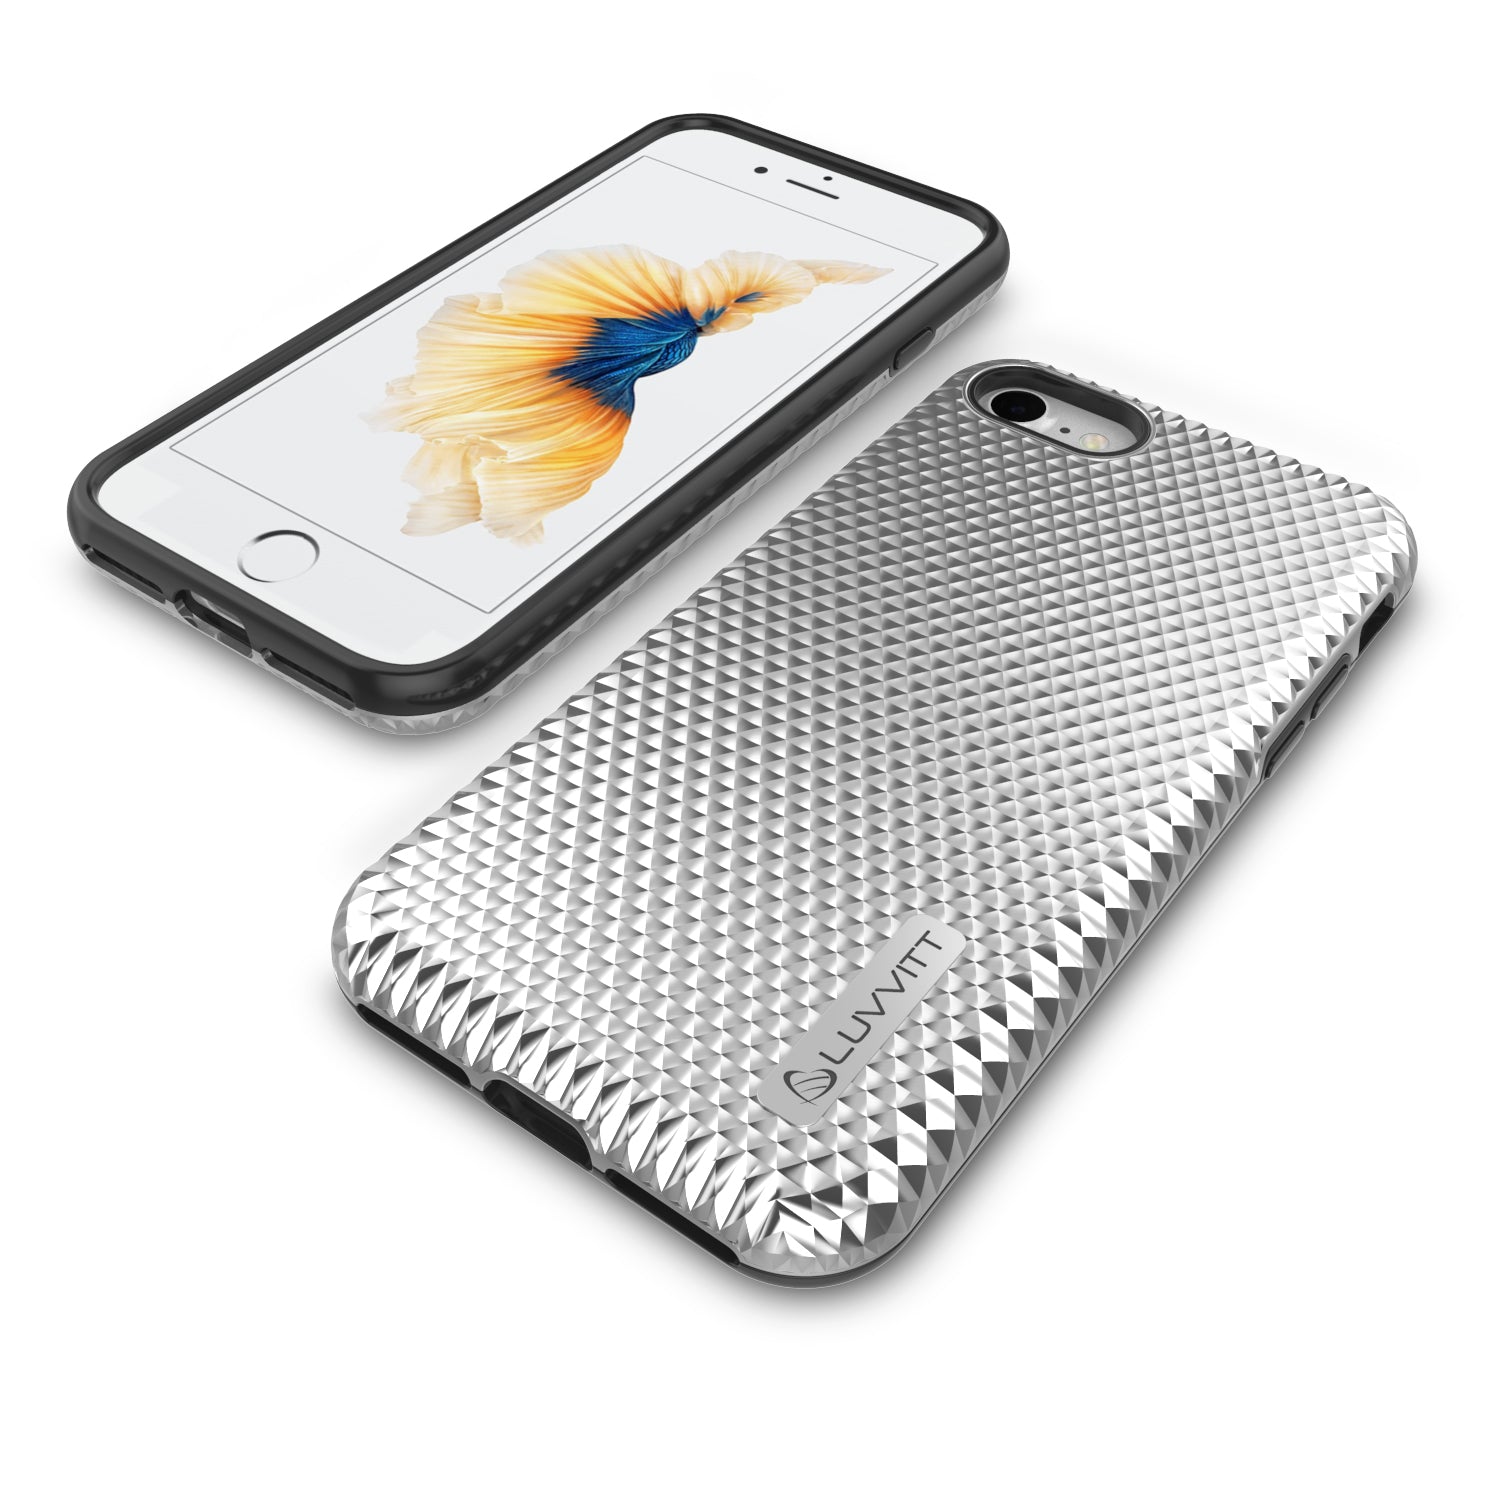 Luvvitt Brilliant Armor Case for iPhone SE 2020 / iPhone 7 / iPhone 8 - Silver